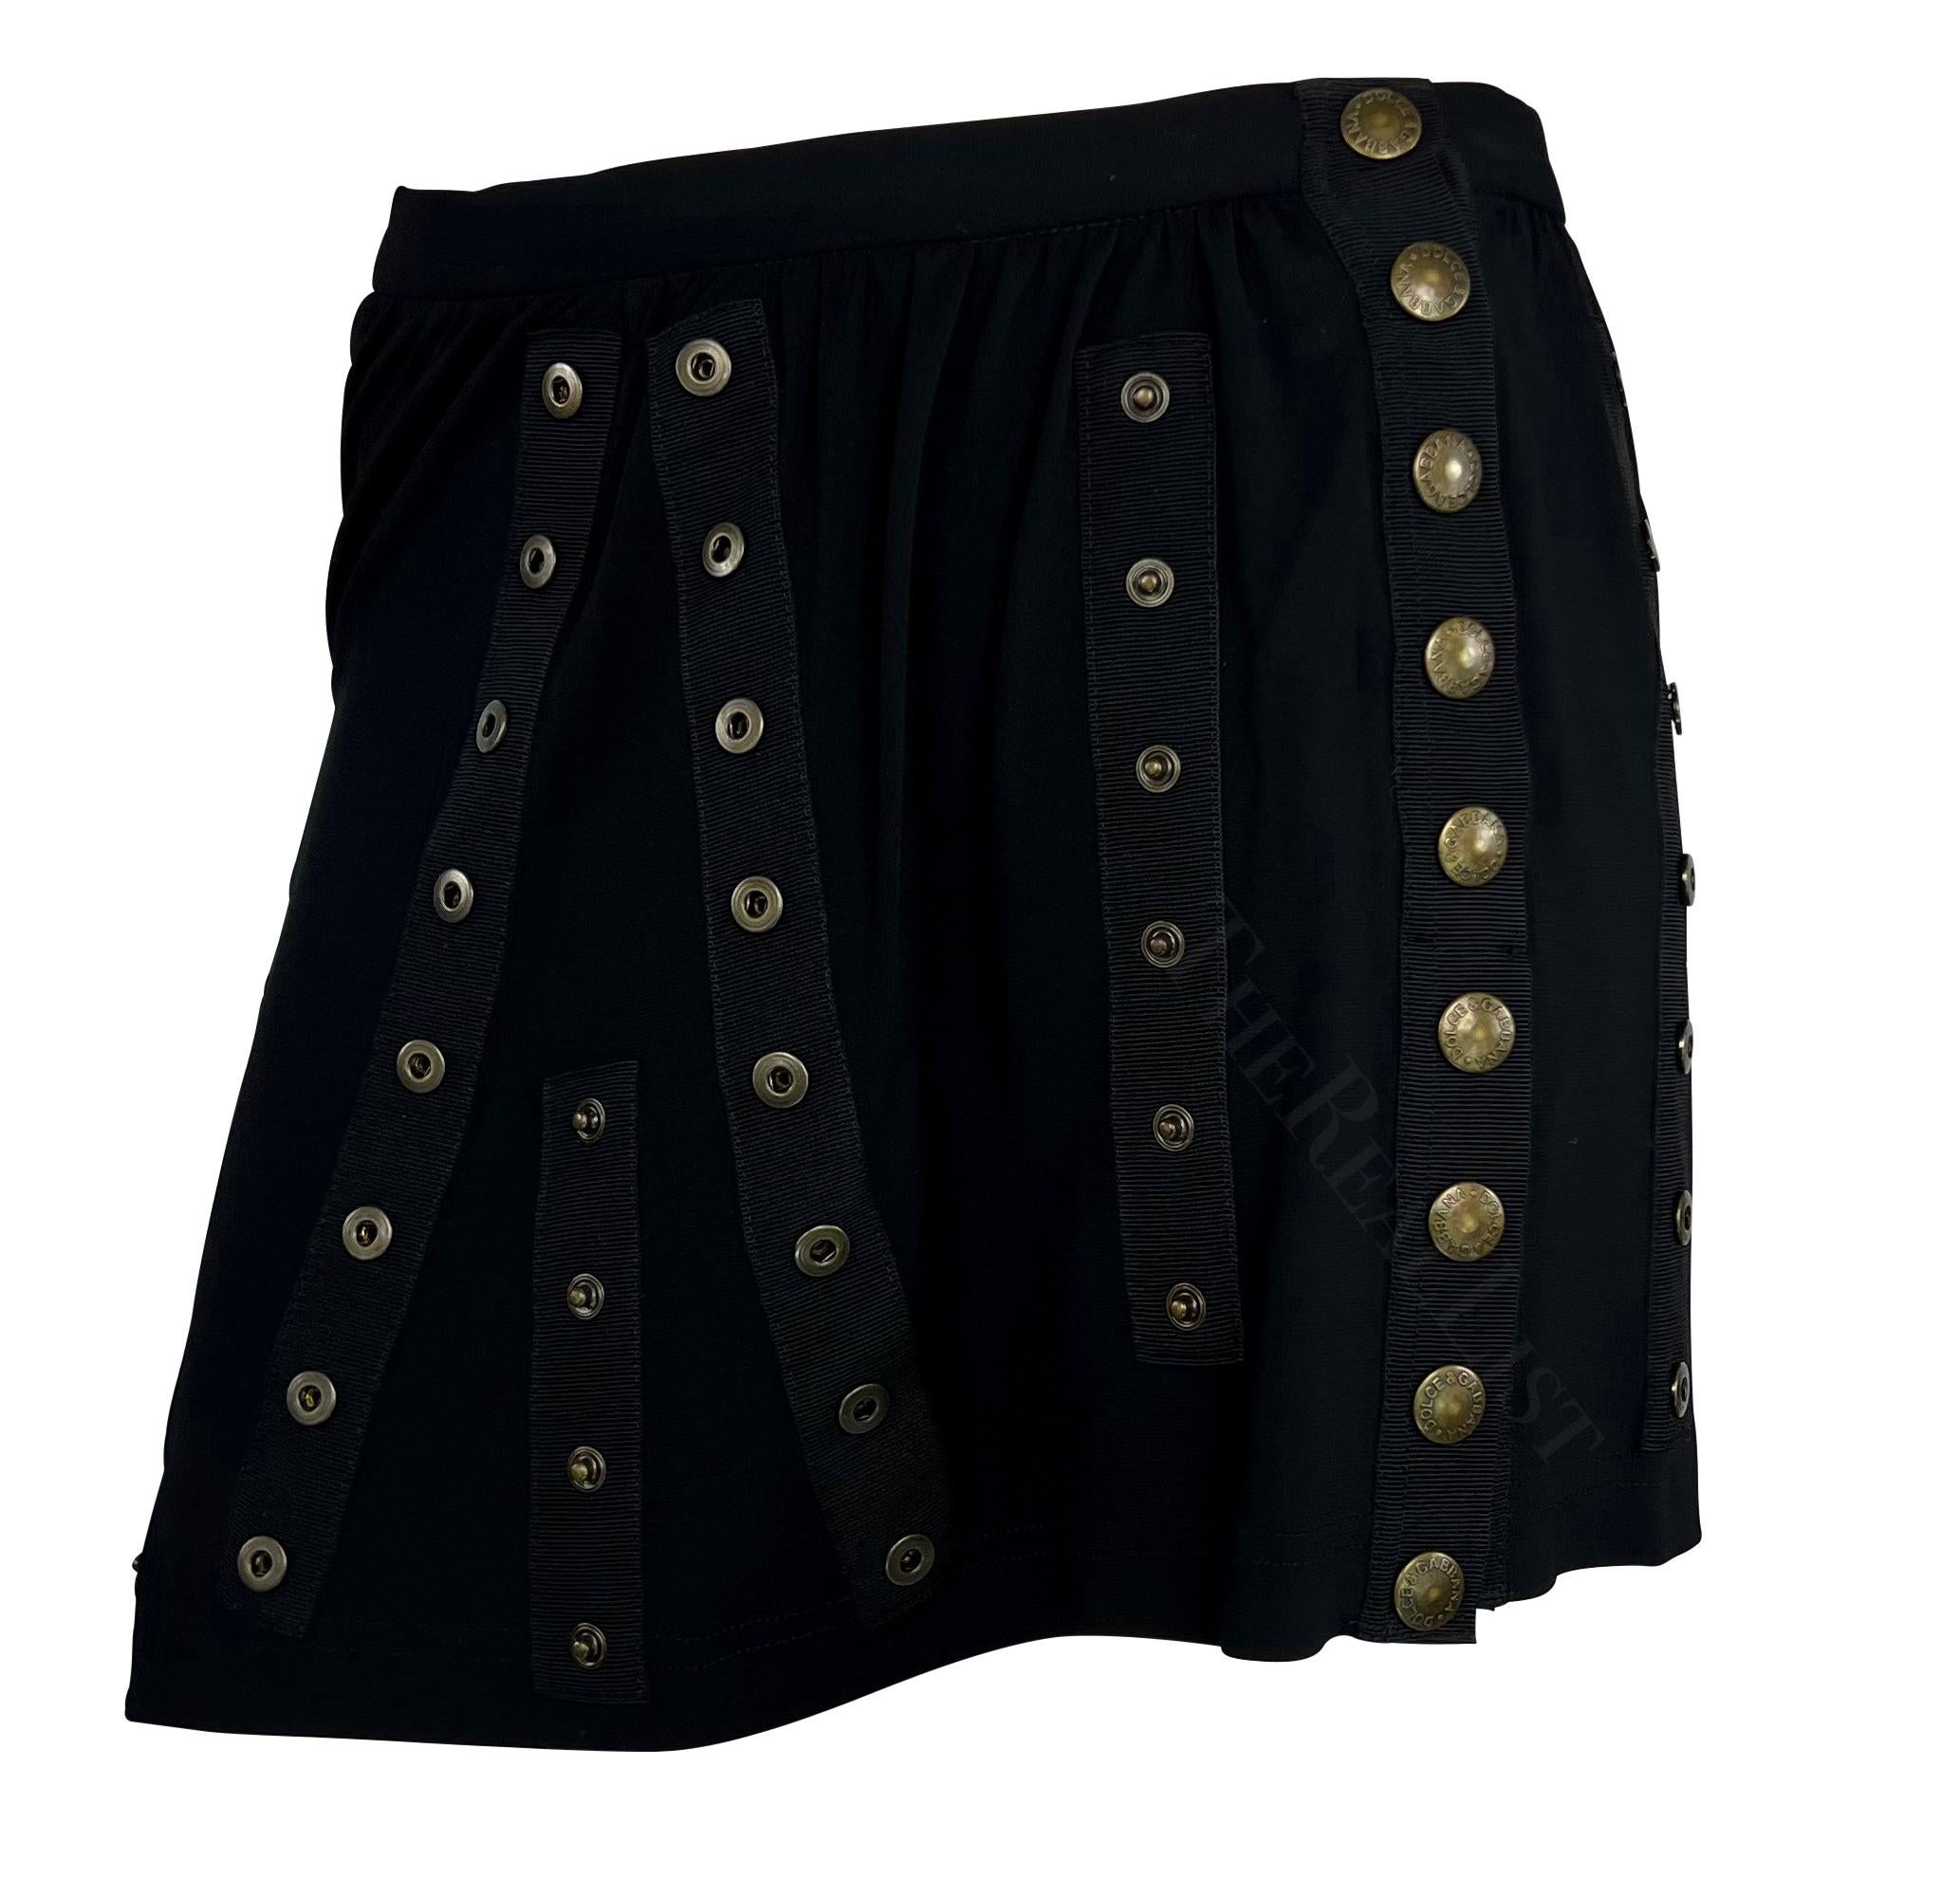 Presentinga fabulous black Dolce and Gabbana snap mini skirt. From the Spring/Summer 2003 ‘Sex and Love’ collection, this skirt is covered in many snaps that allow it to be fitted and worn to the wearer’s desire. Many looks in the following